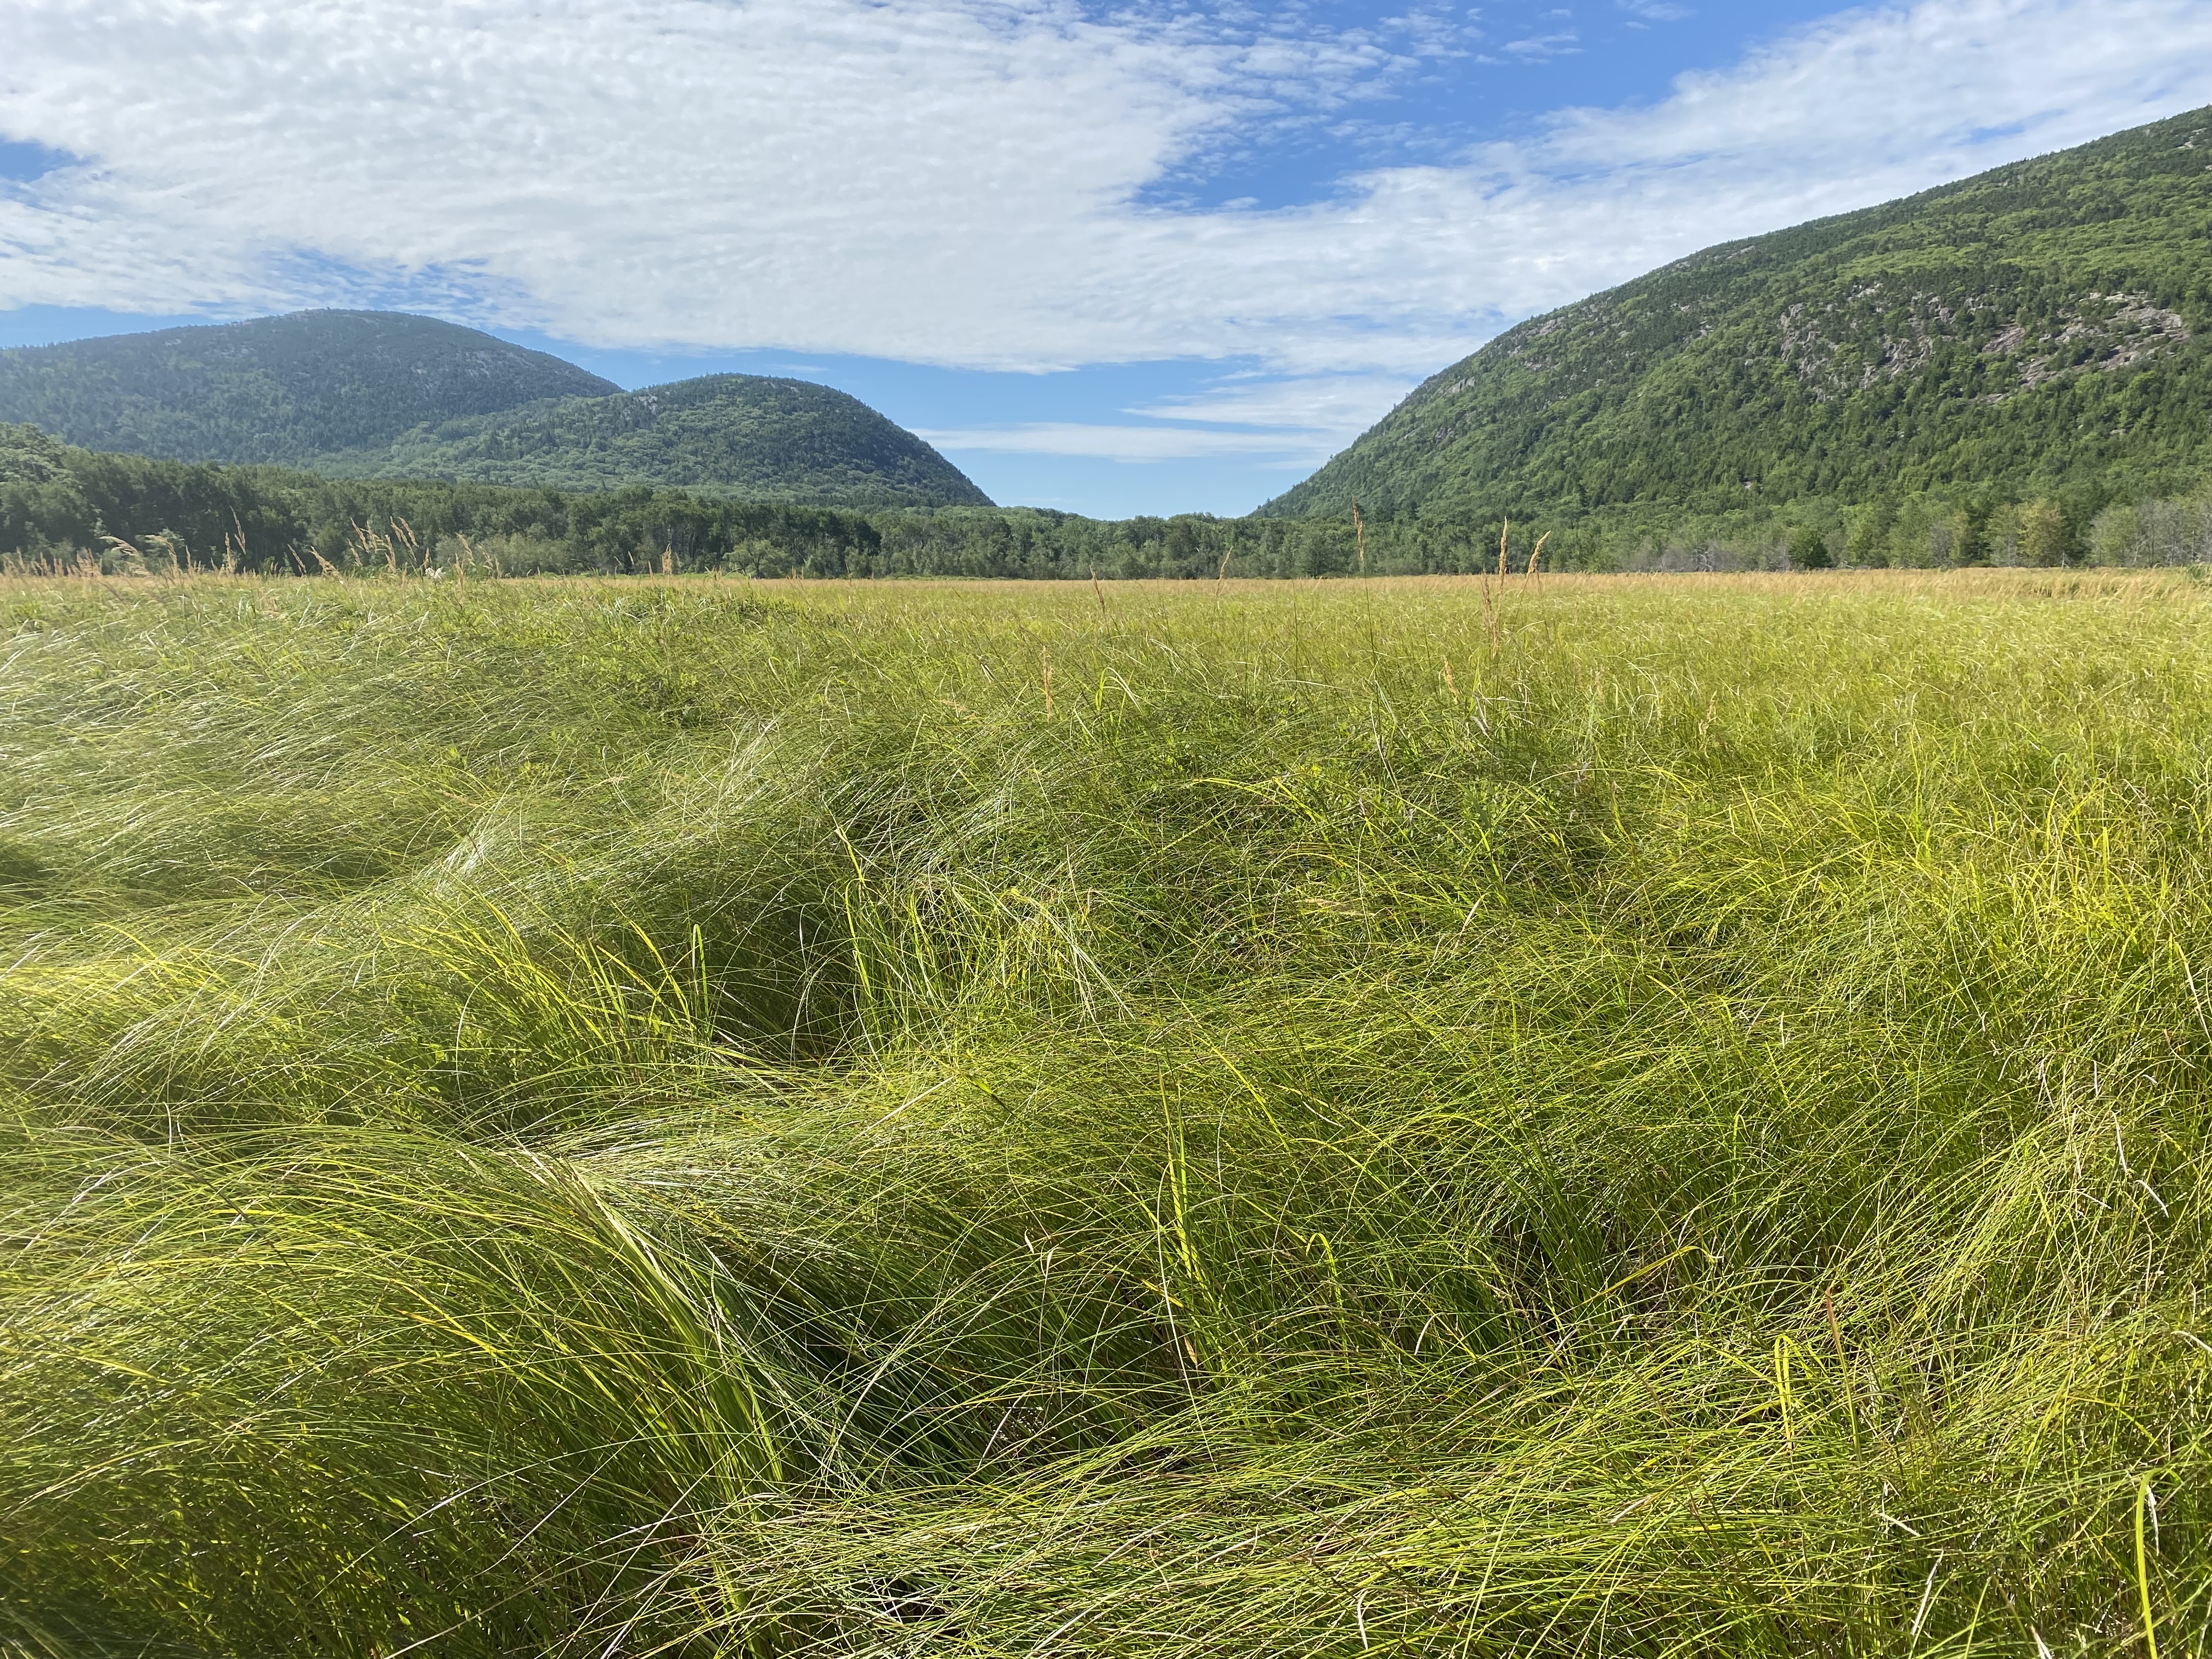 An open expanse of tall grass bent over in swaths in the foreground with mountains in distance